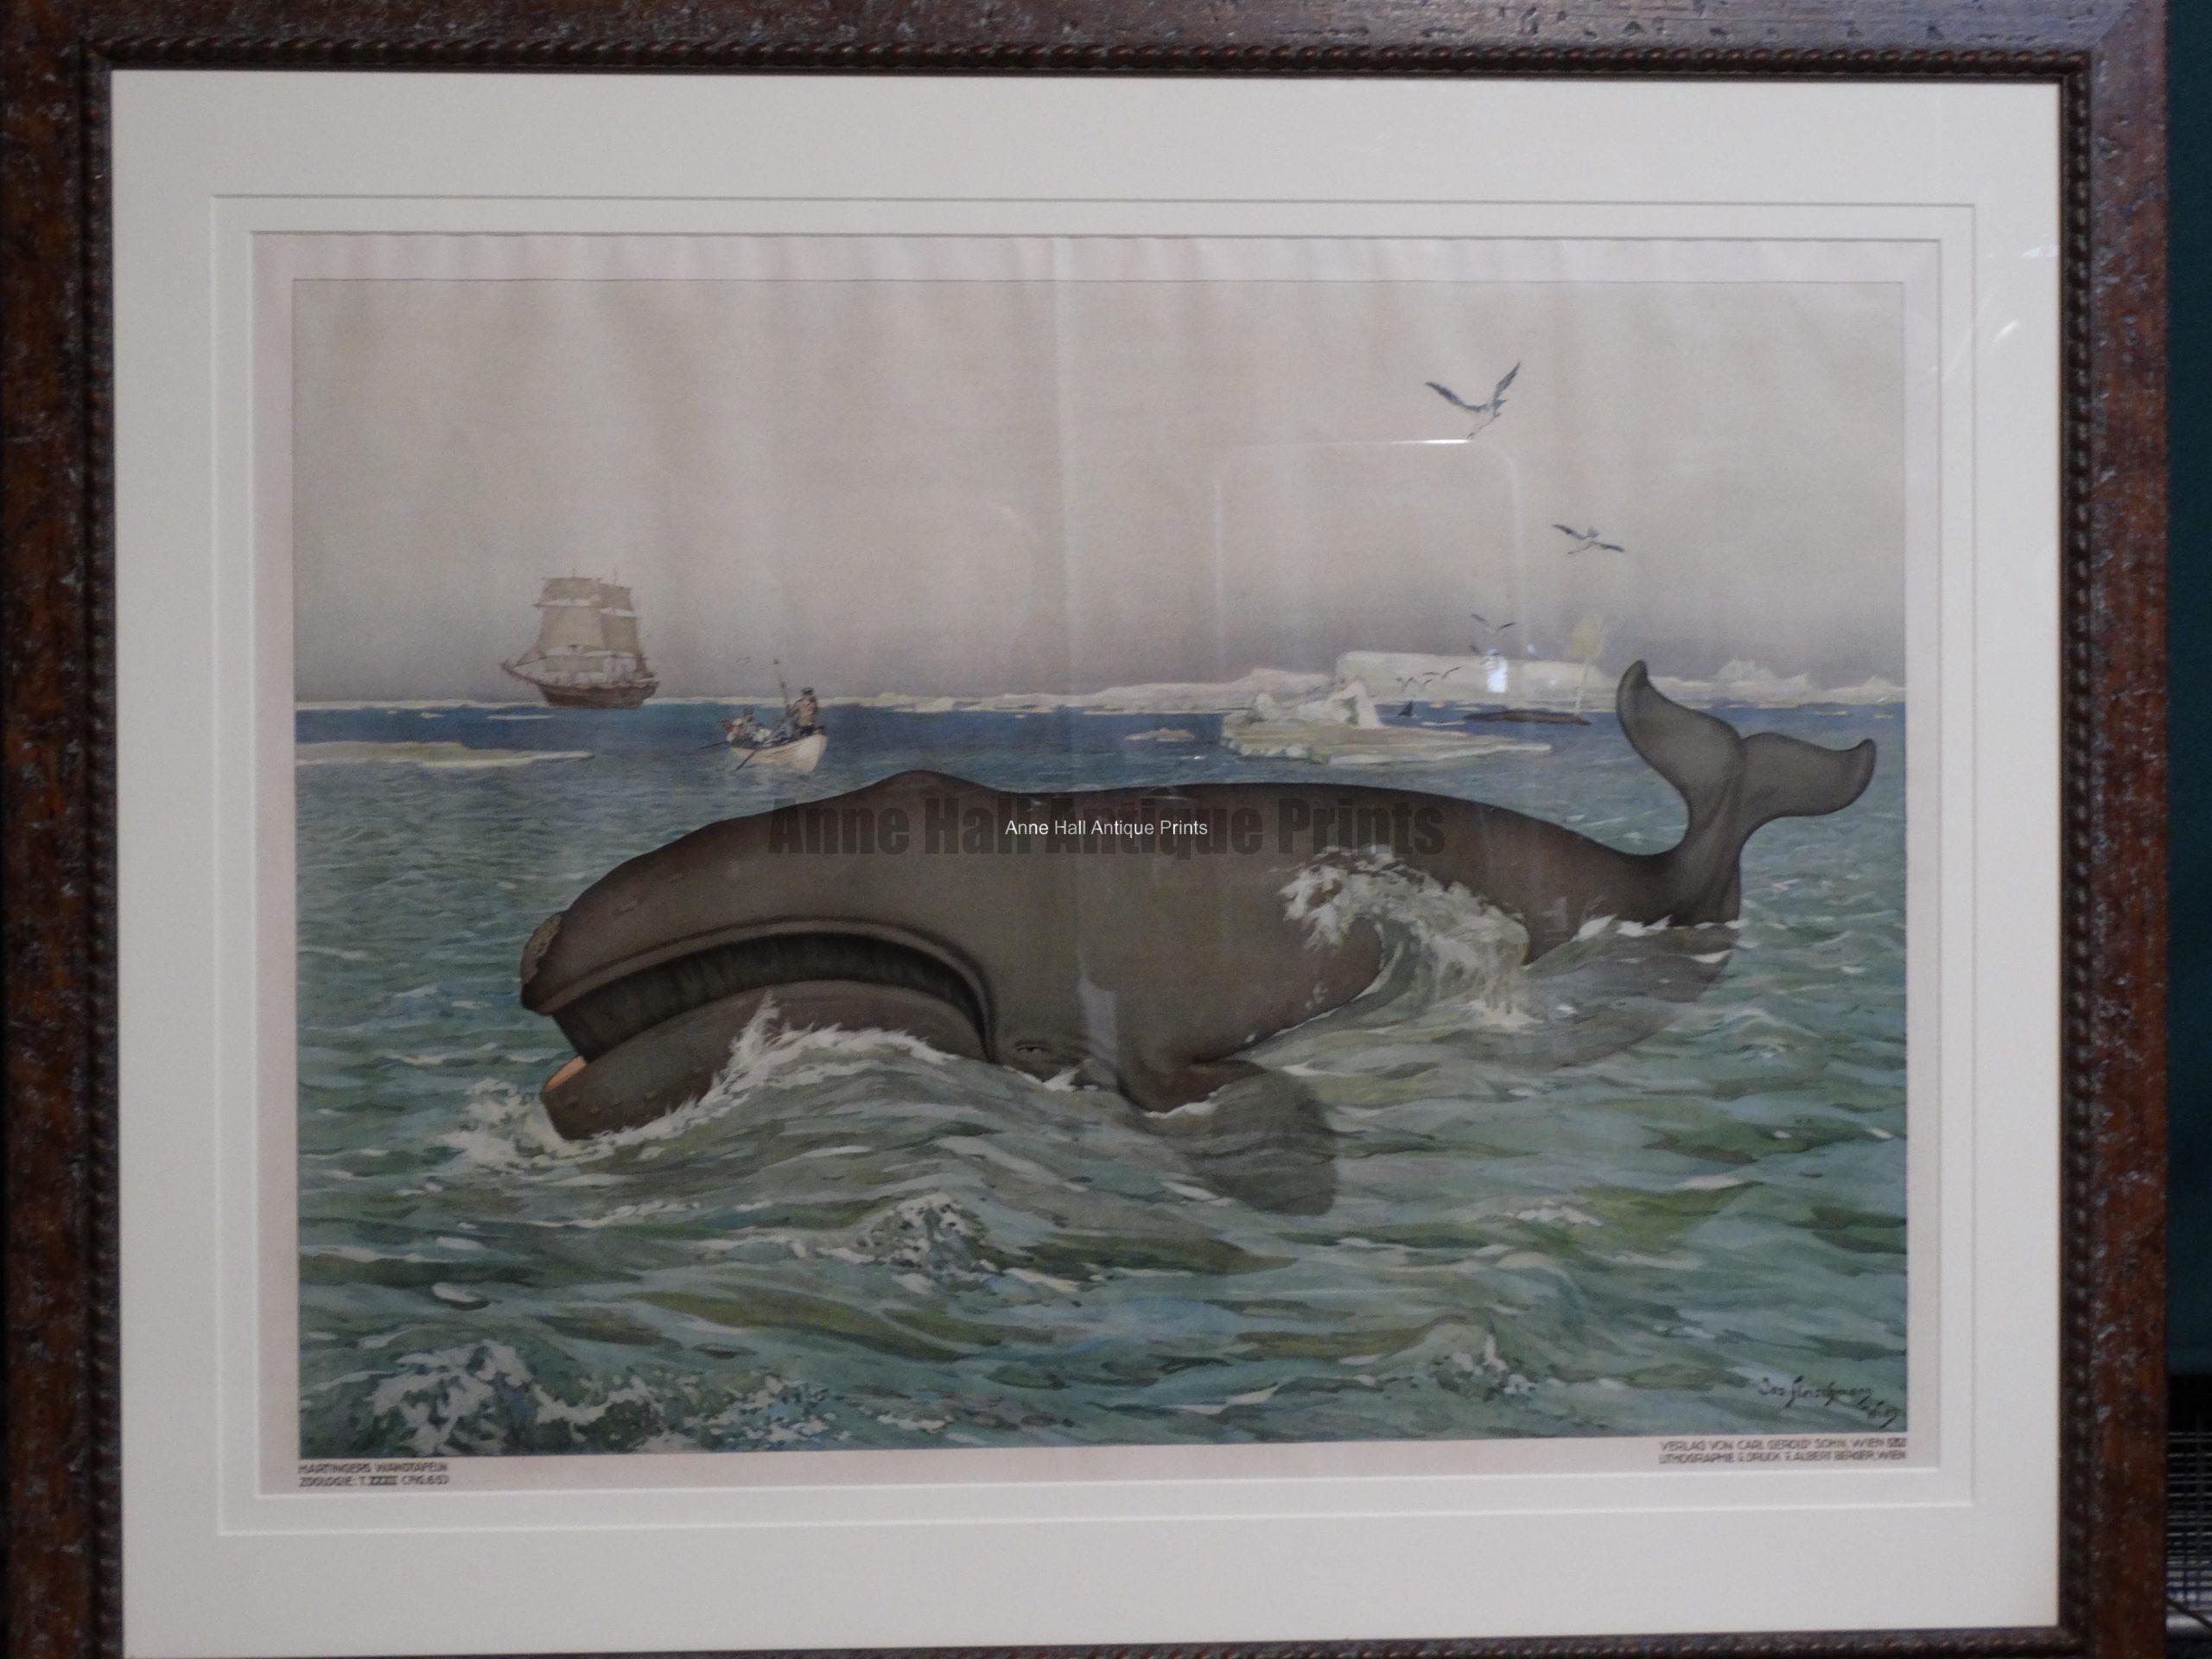 Giant whale vintage poster, archival professional frame job. Rustic driftwood like wood frame. An antique lithograph, professionally framed with archival materials, in weathered (driftwood like) wood frame. Austrian color lithograph, c. 1900. 46" wide x 39" high. $2200.